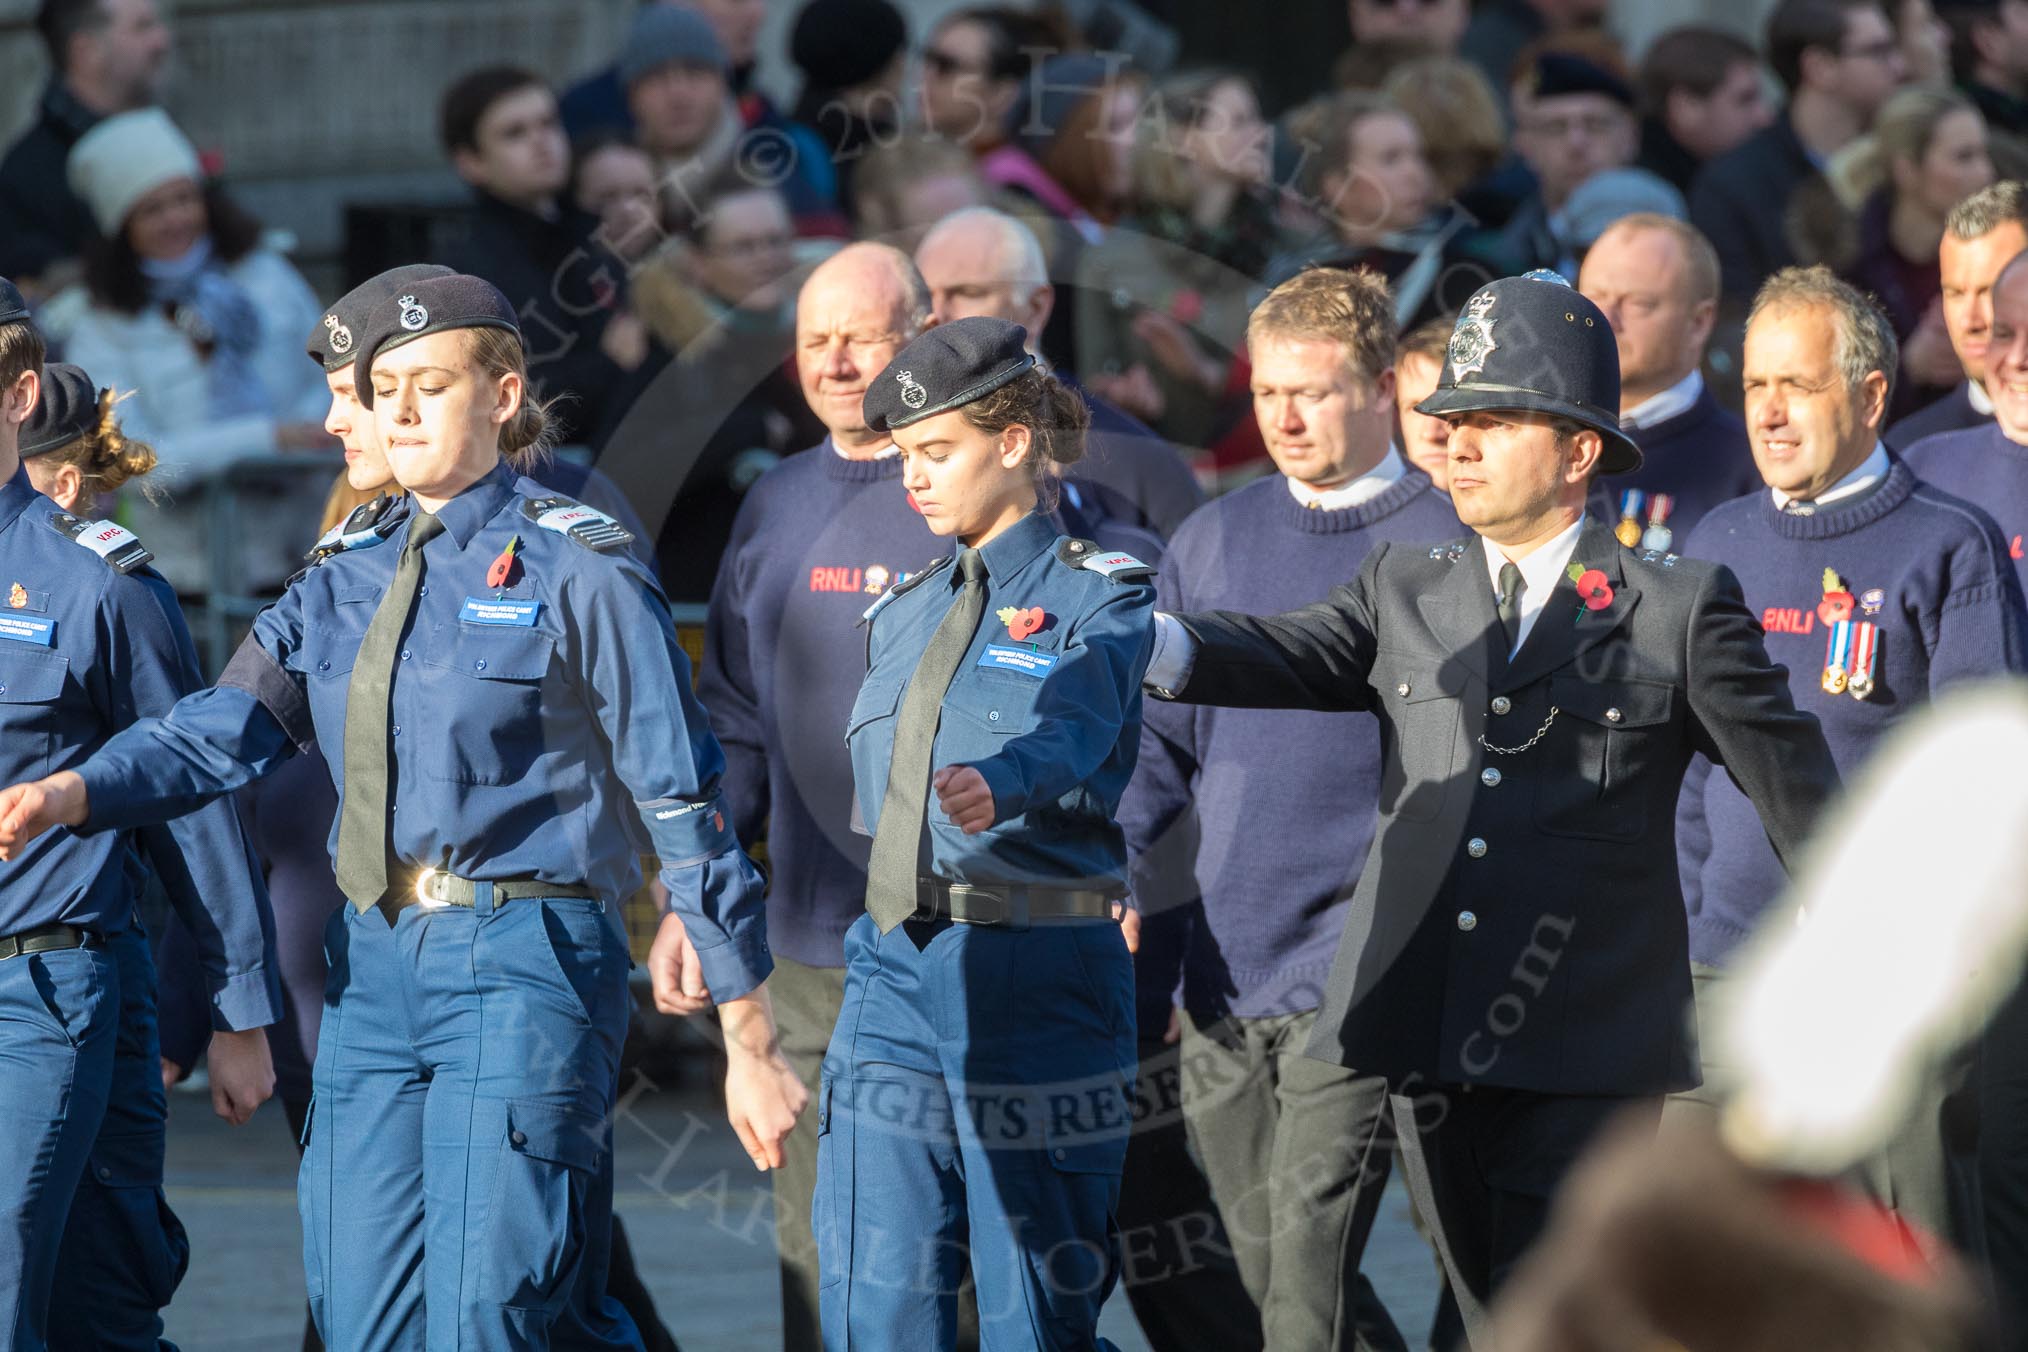 March Past, Remembrance Sunday at the Cenotaph 2016: M41 Royal National Lifeboat Institution.
Cenotaph, Whitehall, London SW1,
London,
Greater London,
United Kingdom,
on 13 November 2016 at 13:19, image #2946